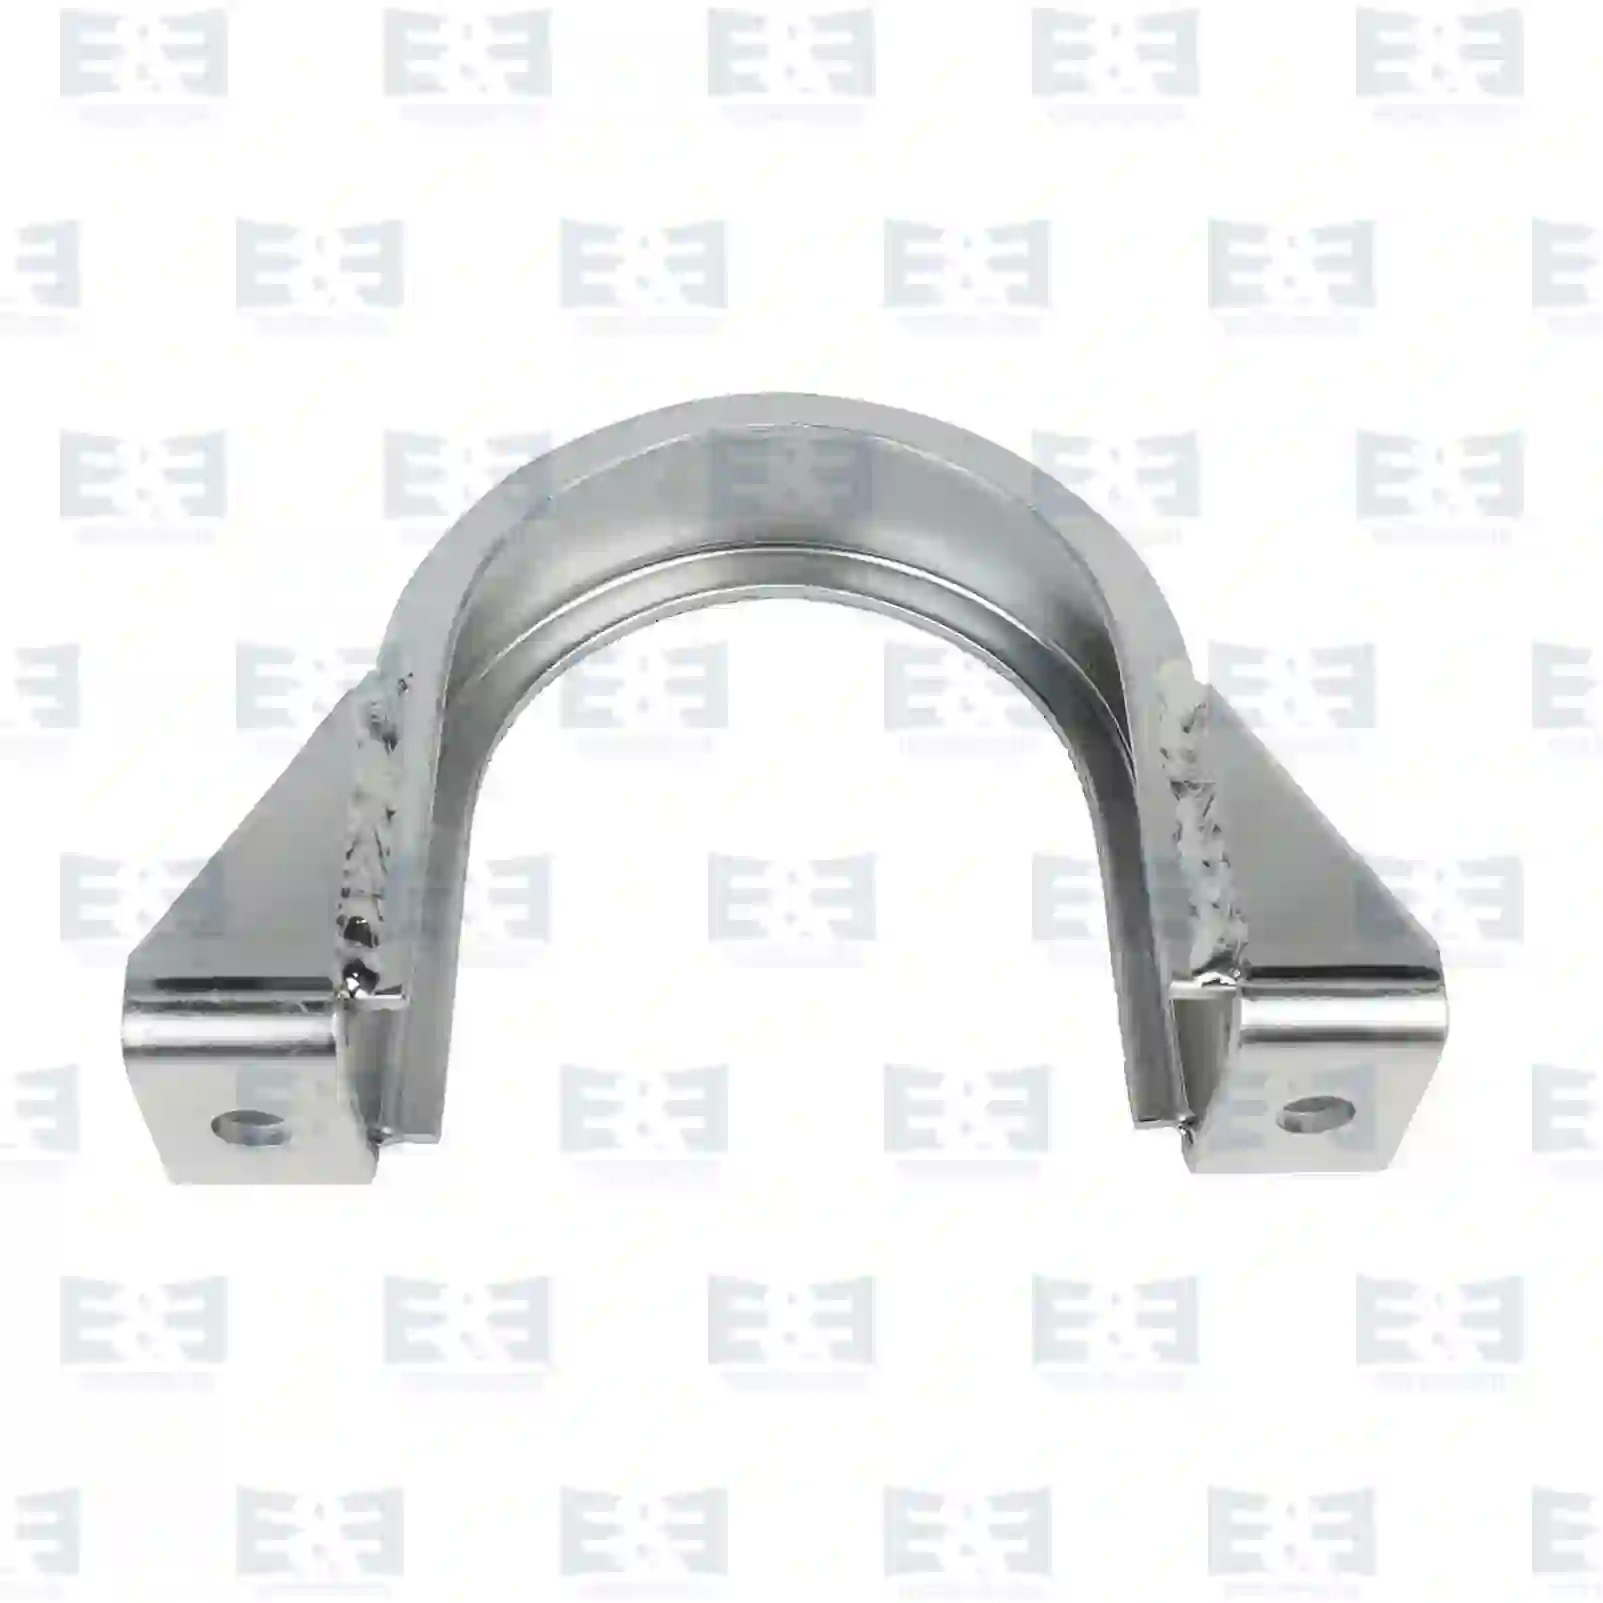 Support Bearing Bracket, center bearing, EE No 2E2276891 ,  oem no:1651230, 263006, ZG40178-0008 E&E Truck Spare Parts | Truck Spare Parts, Auotomotive Spare Parts